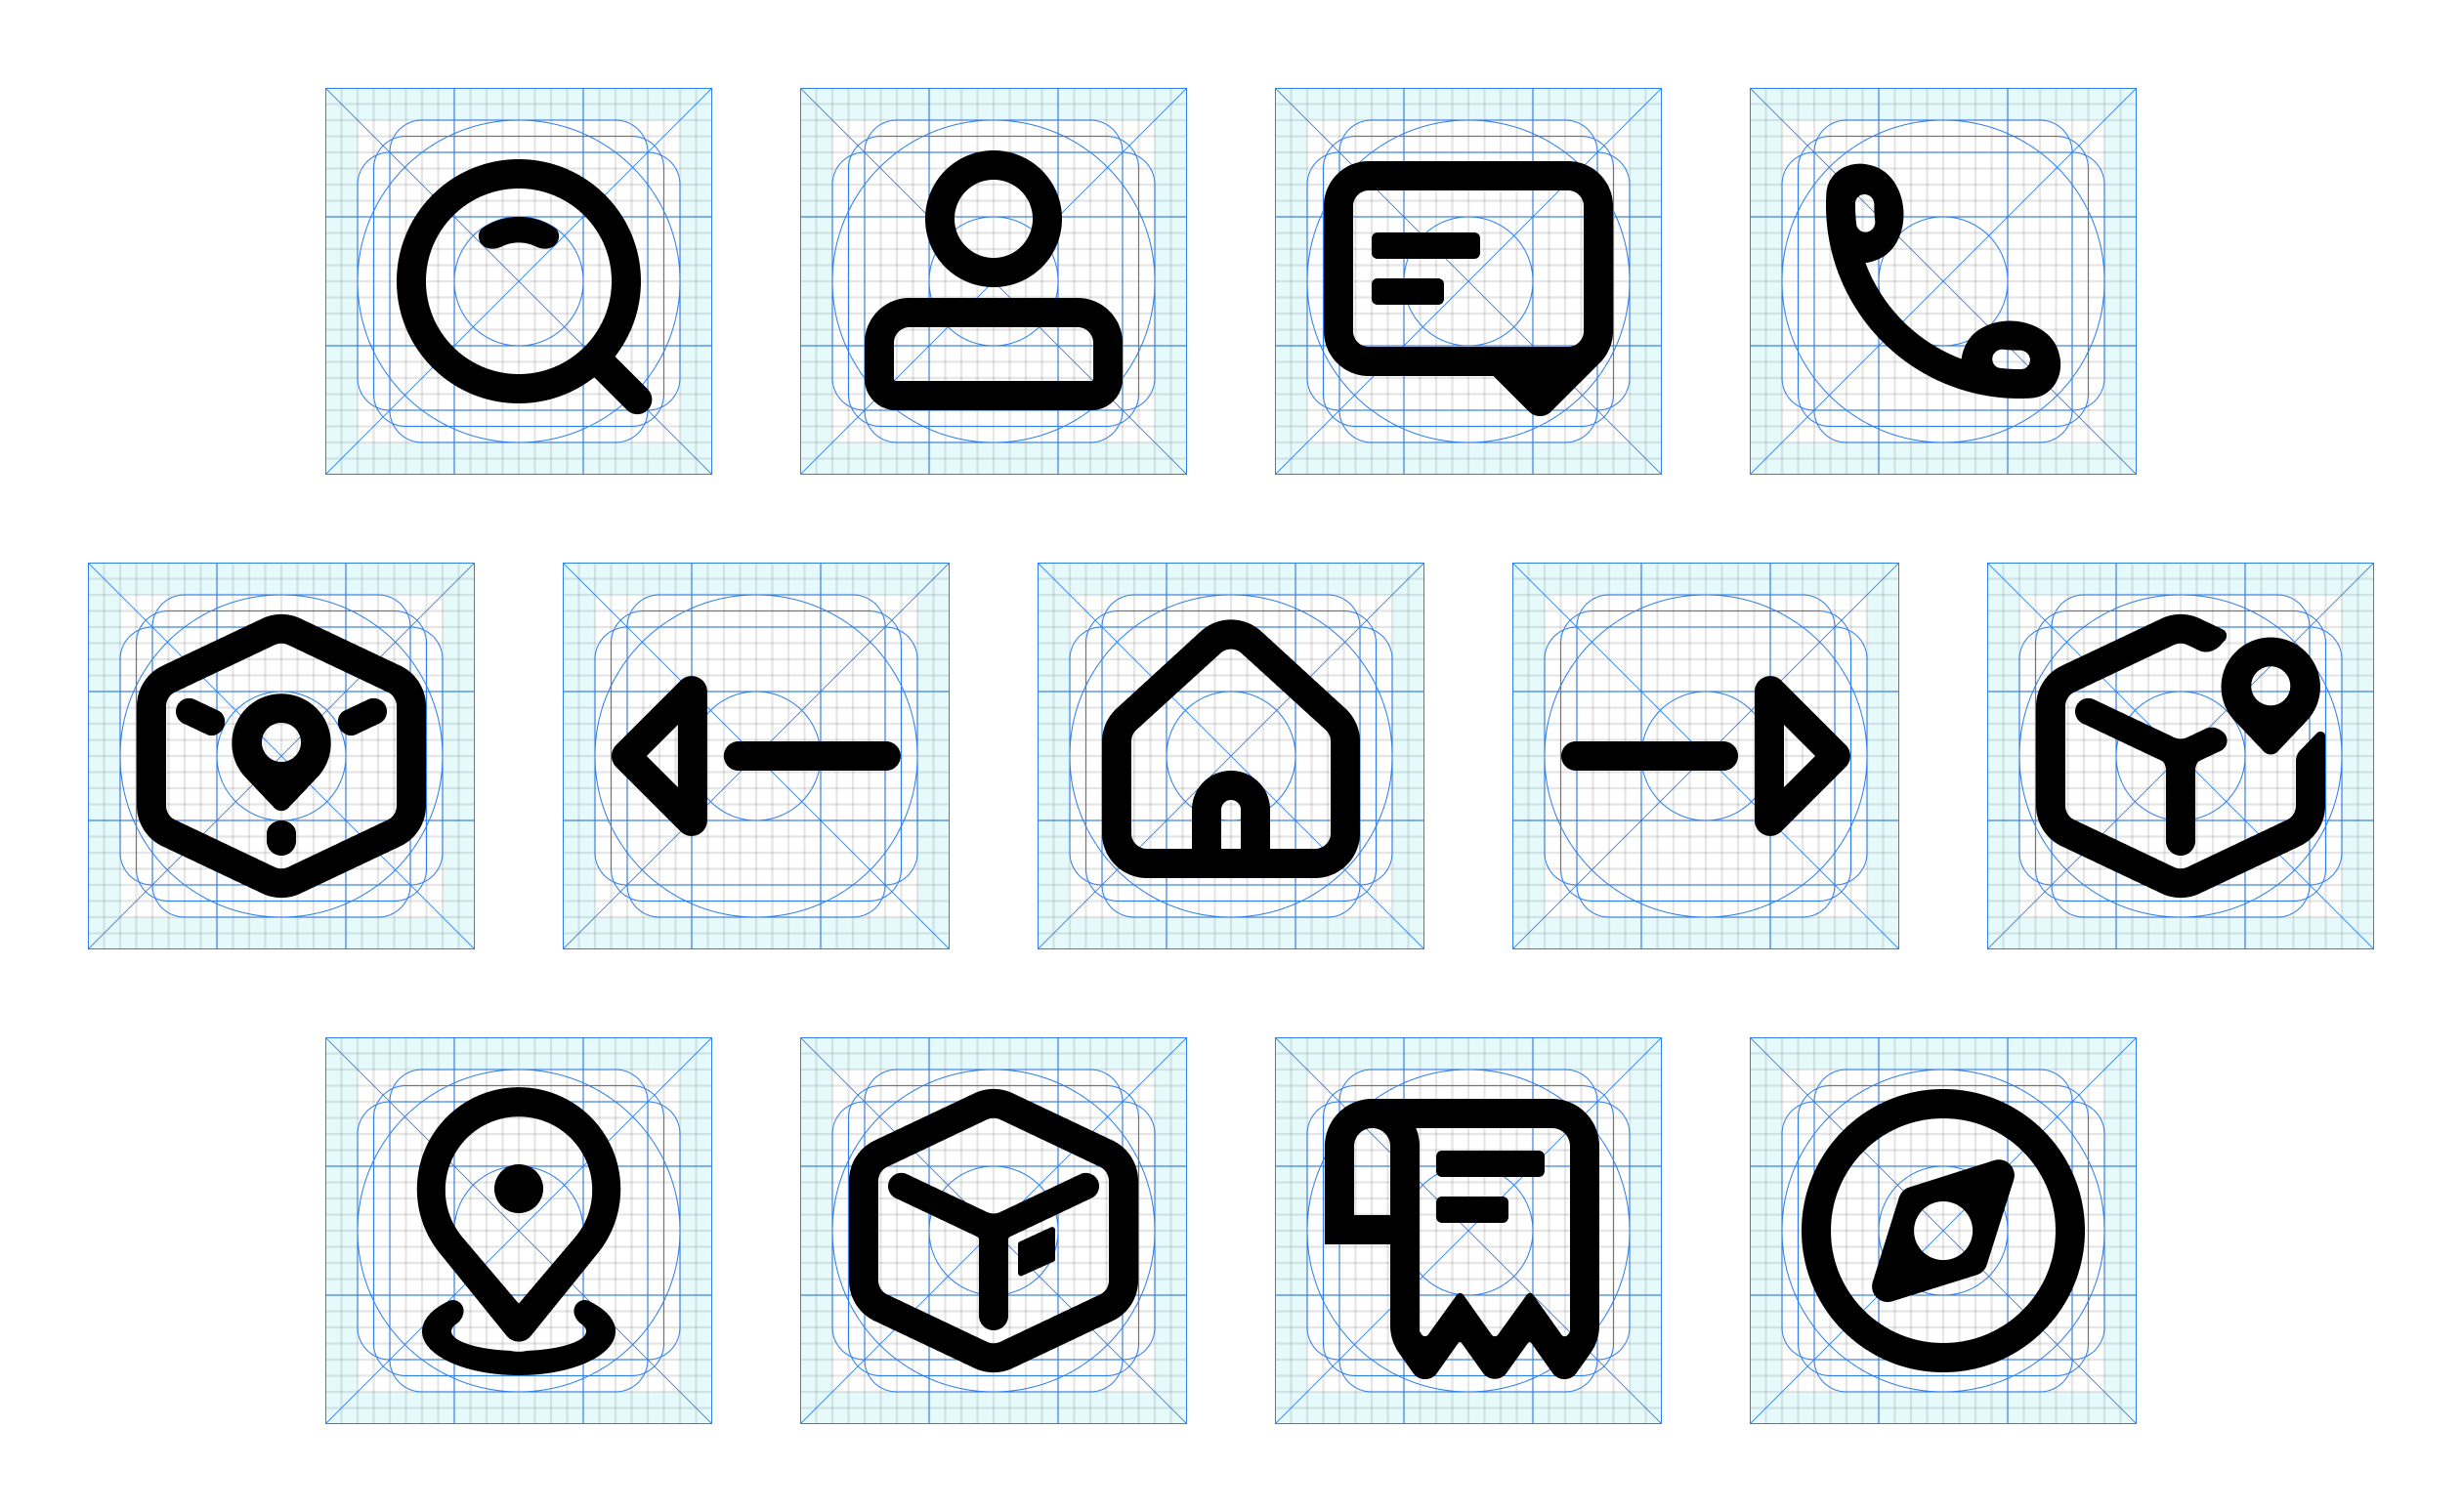 Custom icons designed to match the rounded style